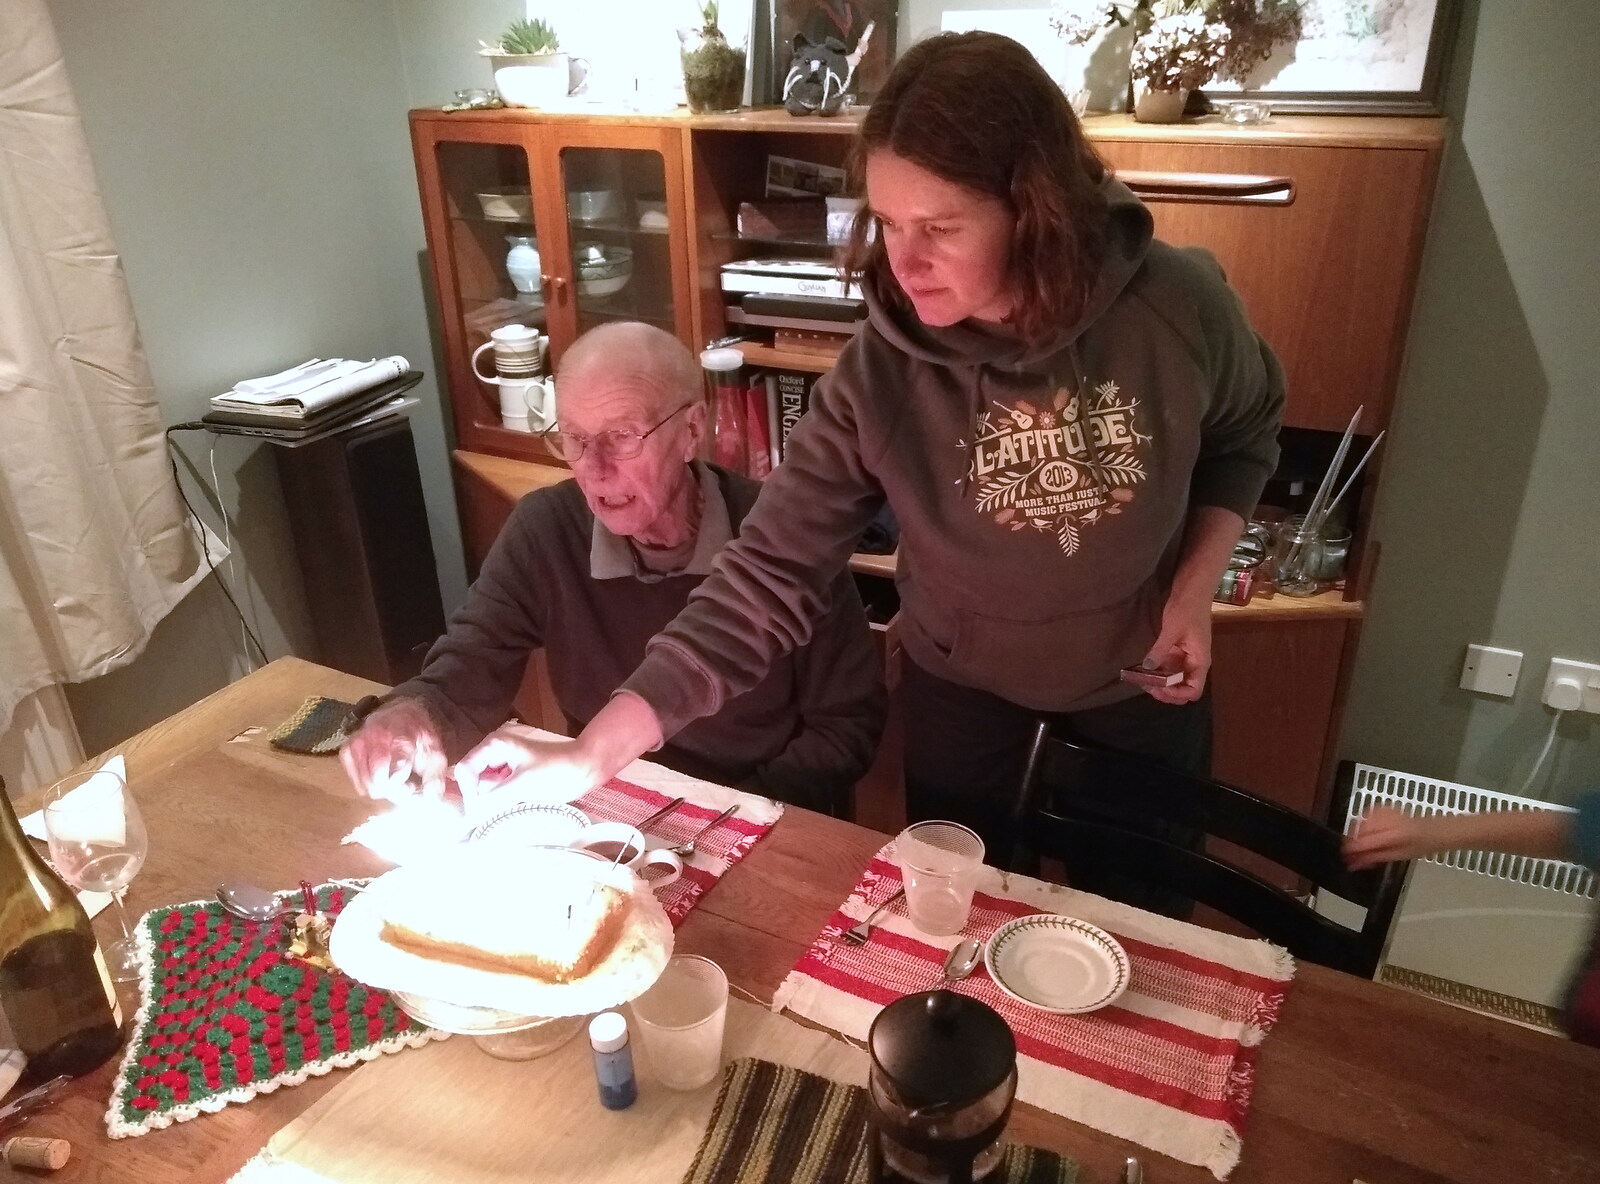 Grandad gets a cake for his birthday from A Walk Around Eye, and the Return of Red Tent, Suffolk and London - 25th February 2018